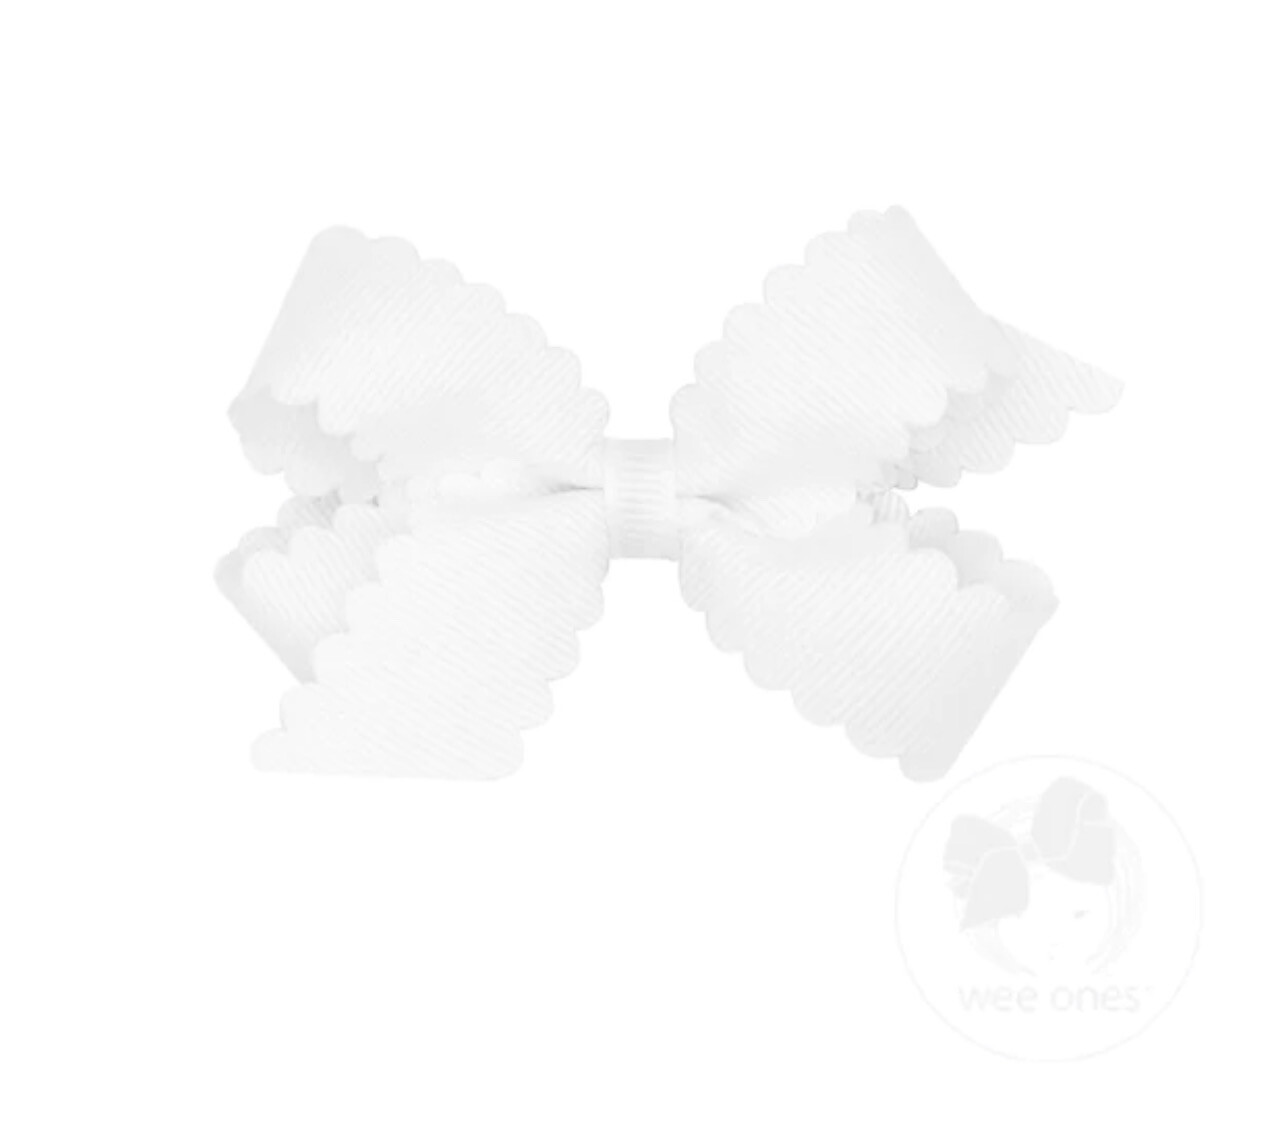 Wee Ones MINI Scallop Edge Hairbow